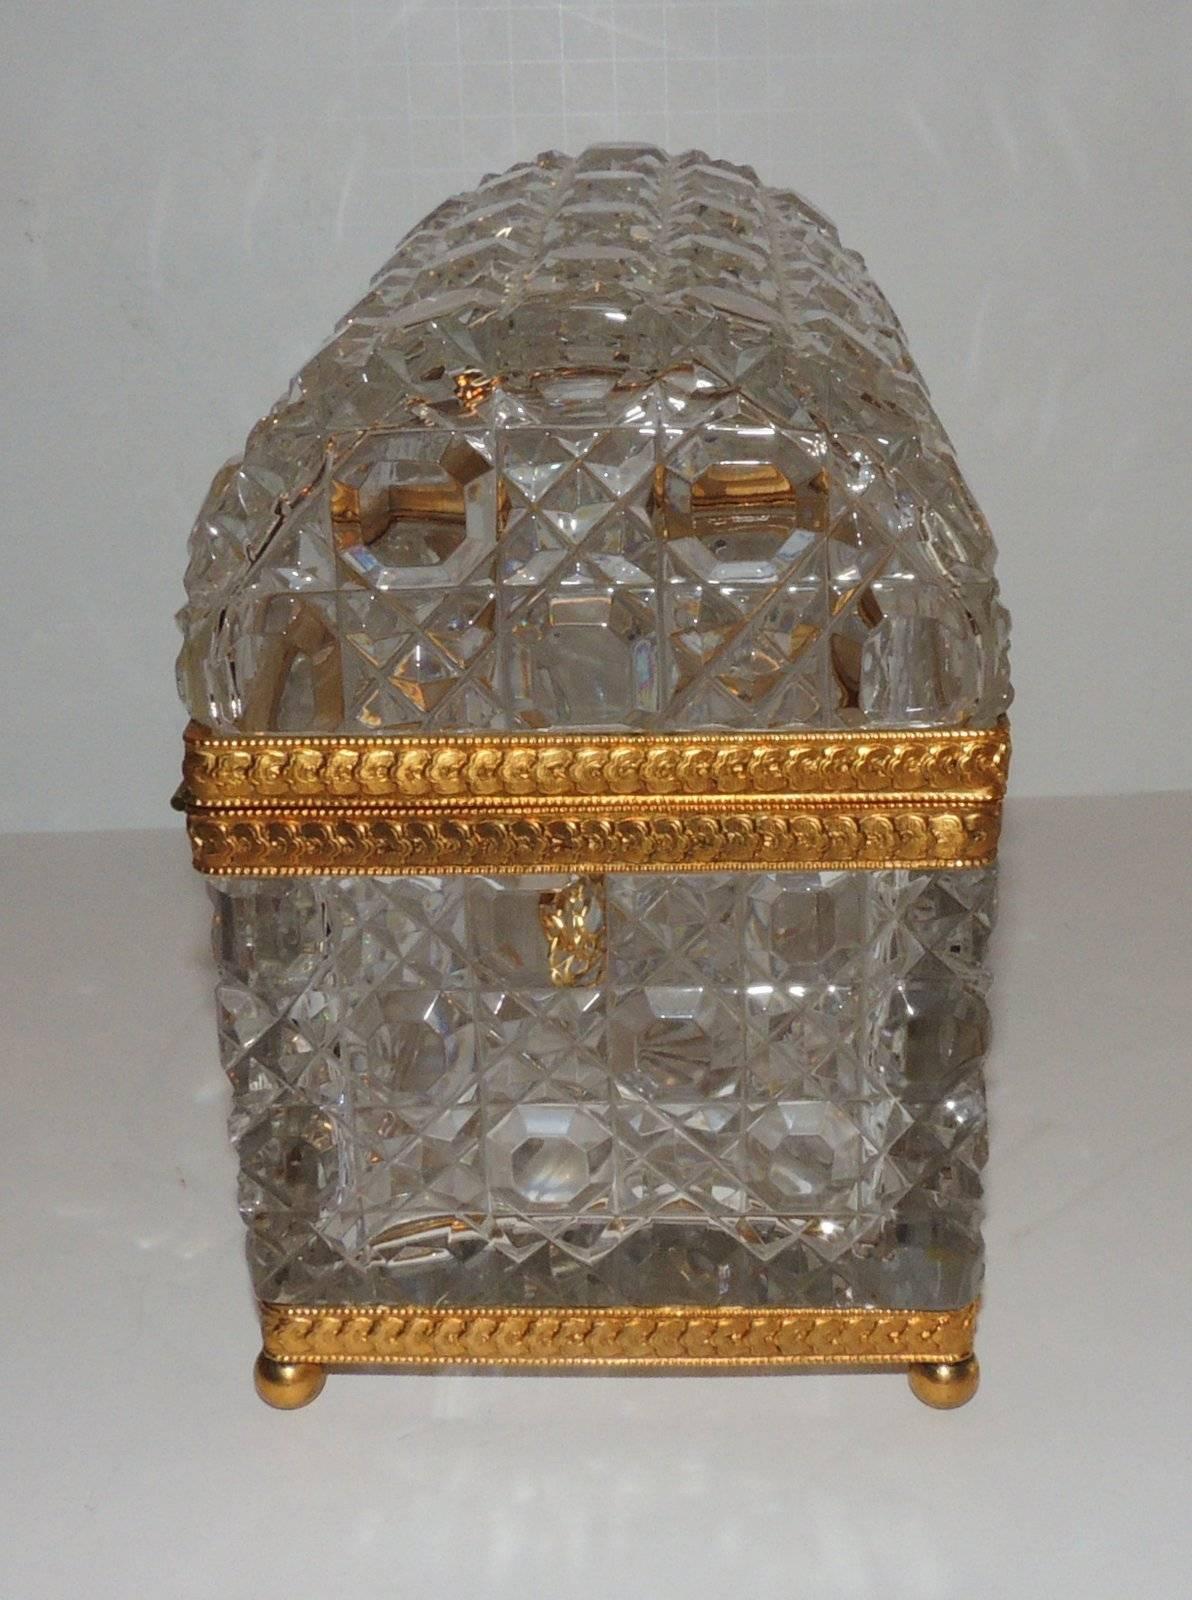 Etched French Ormolu Faceted Cut Crystal Dome Ormolu Wreath Bow Box Casket Jewelry Case